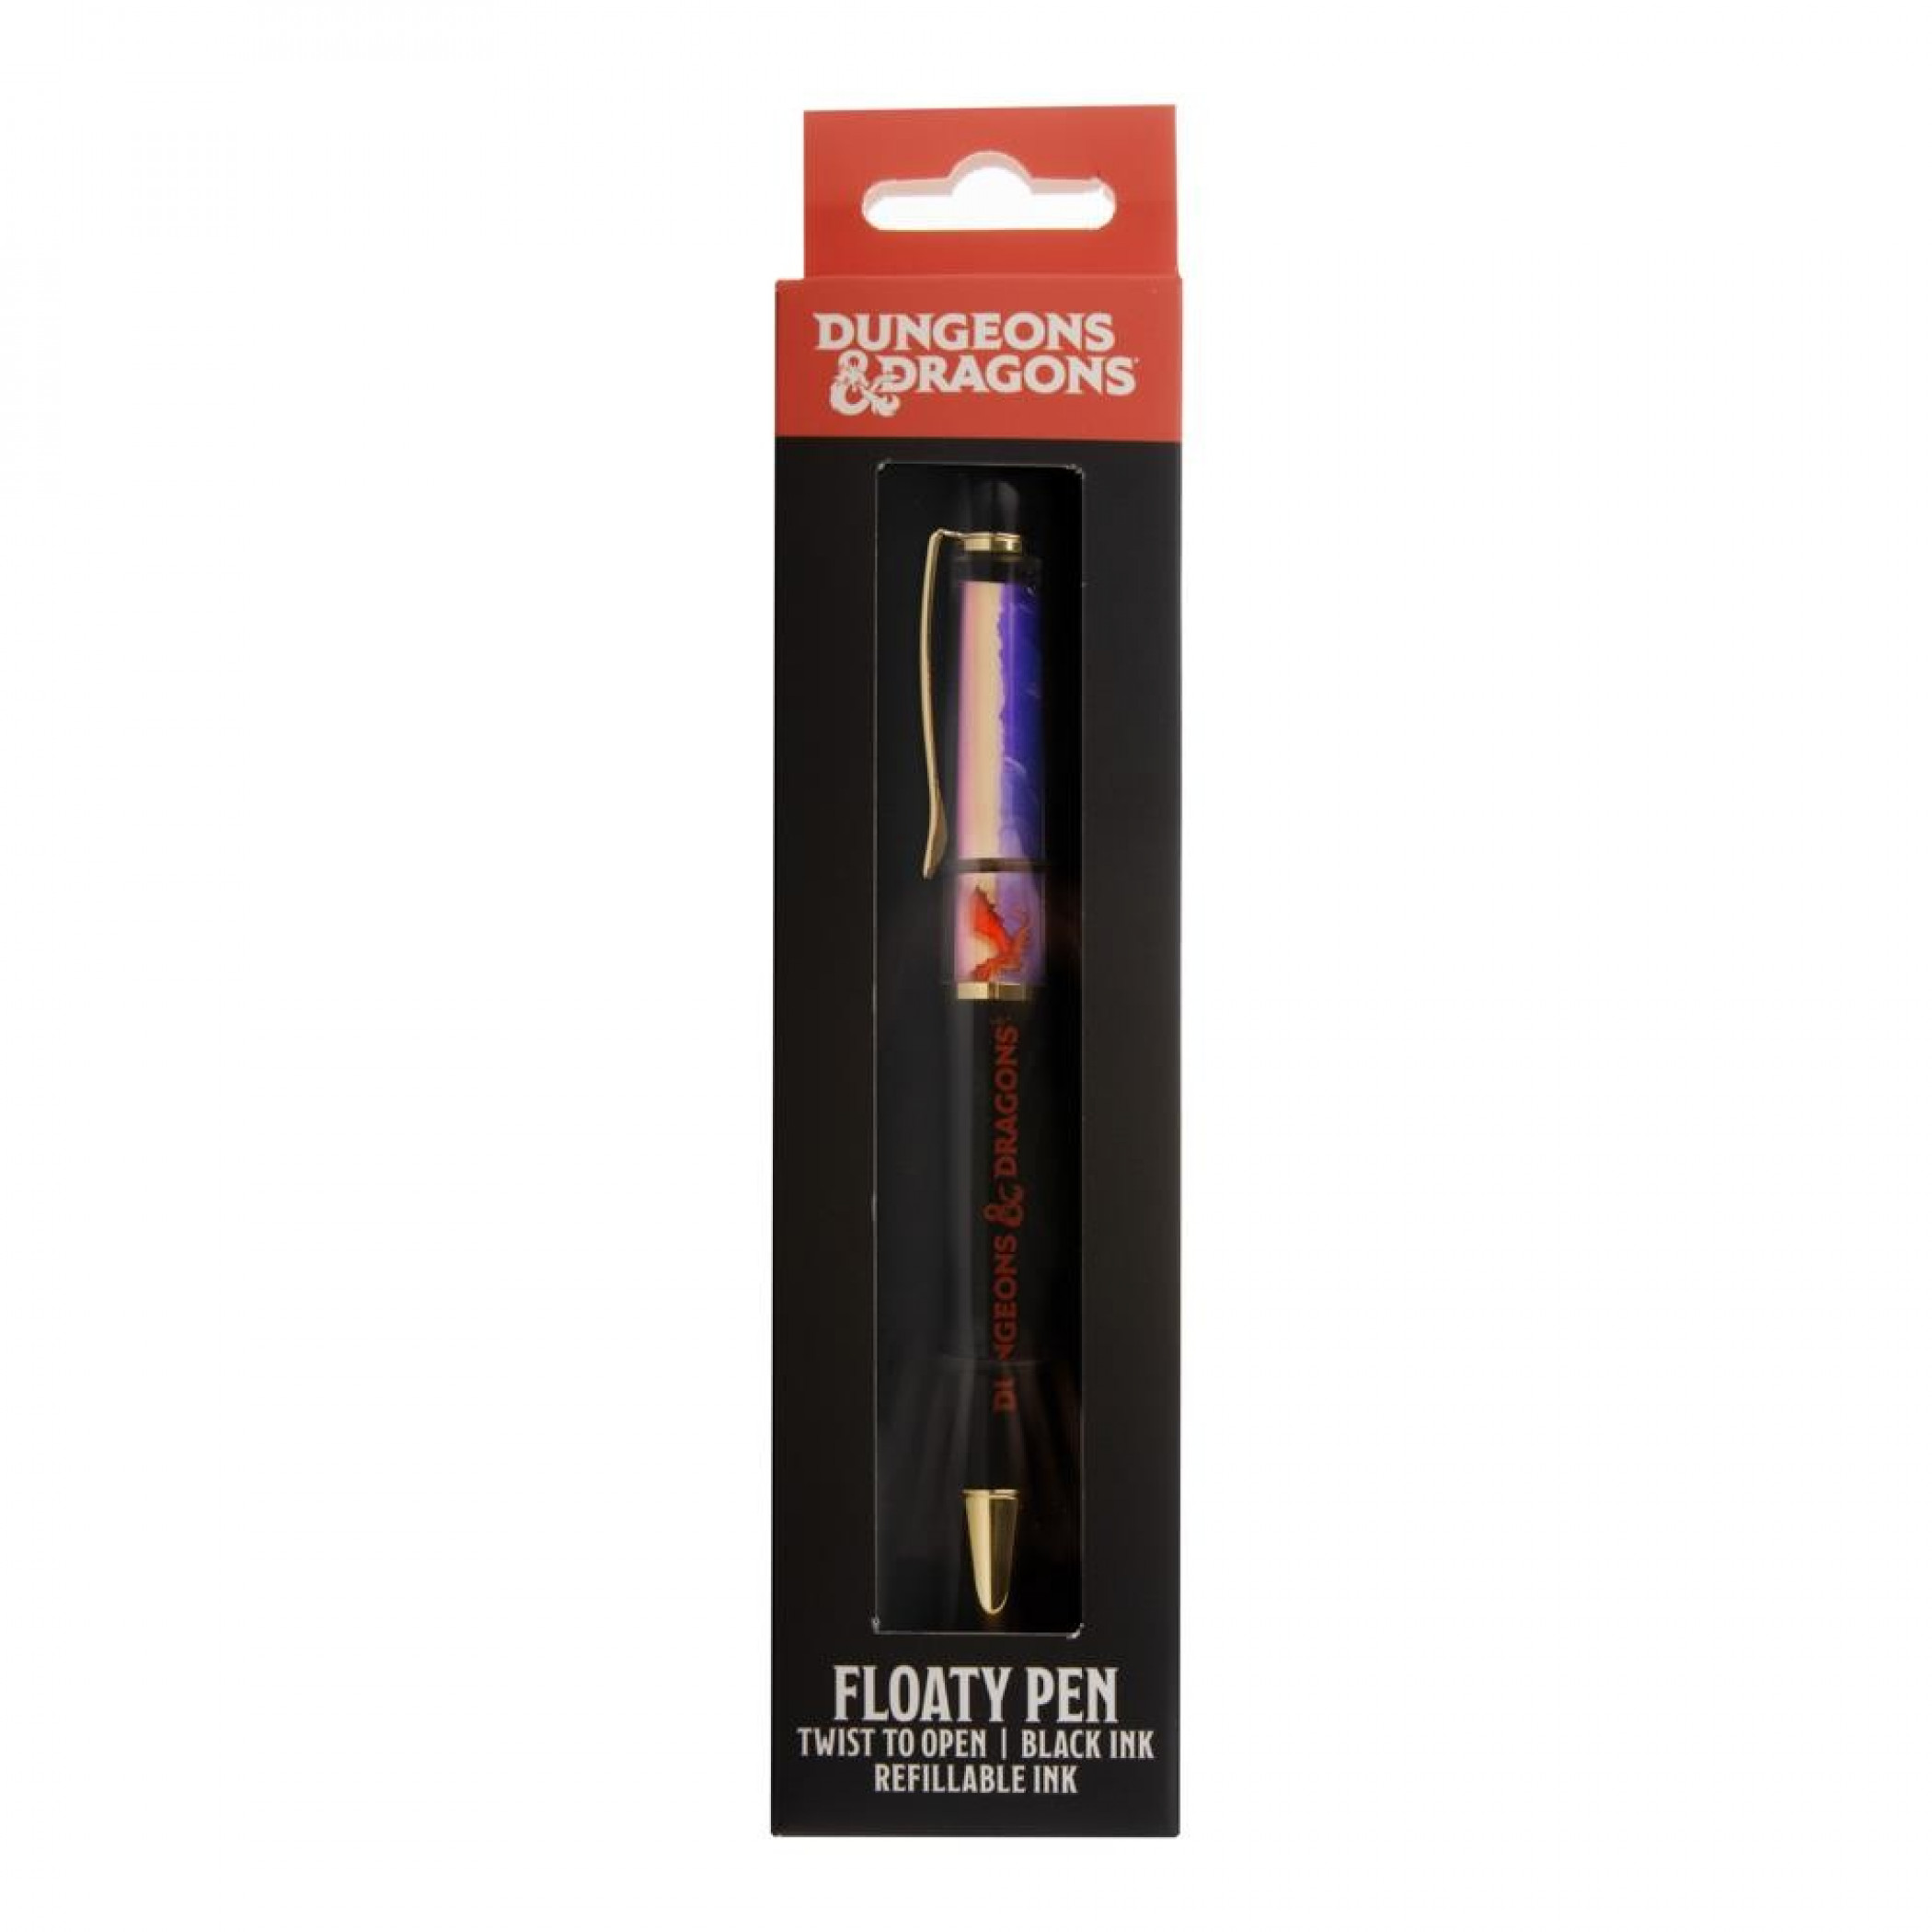 Dungeons and Dragons Scene Floaty Pen